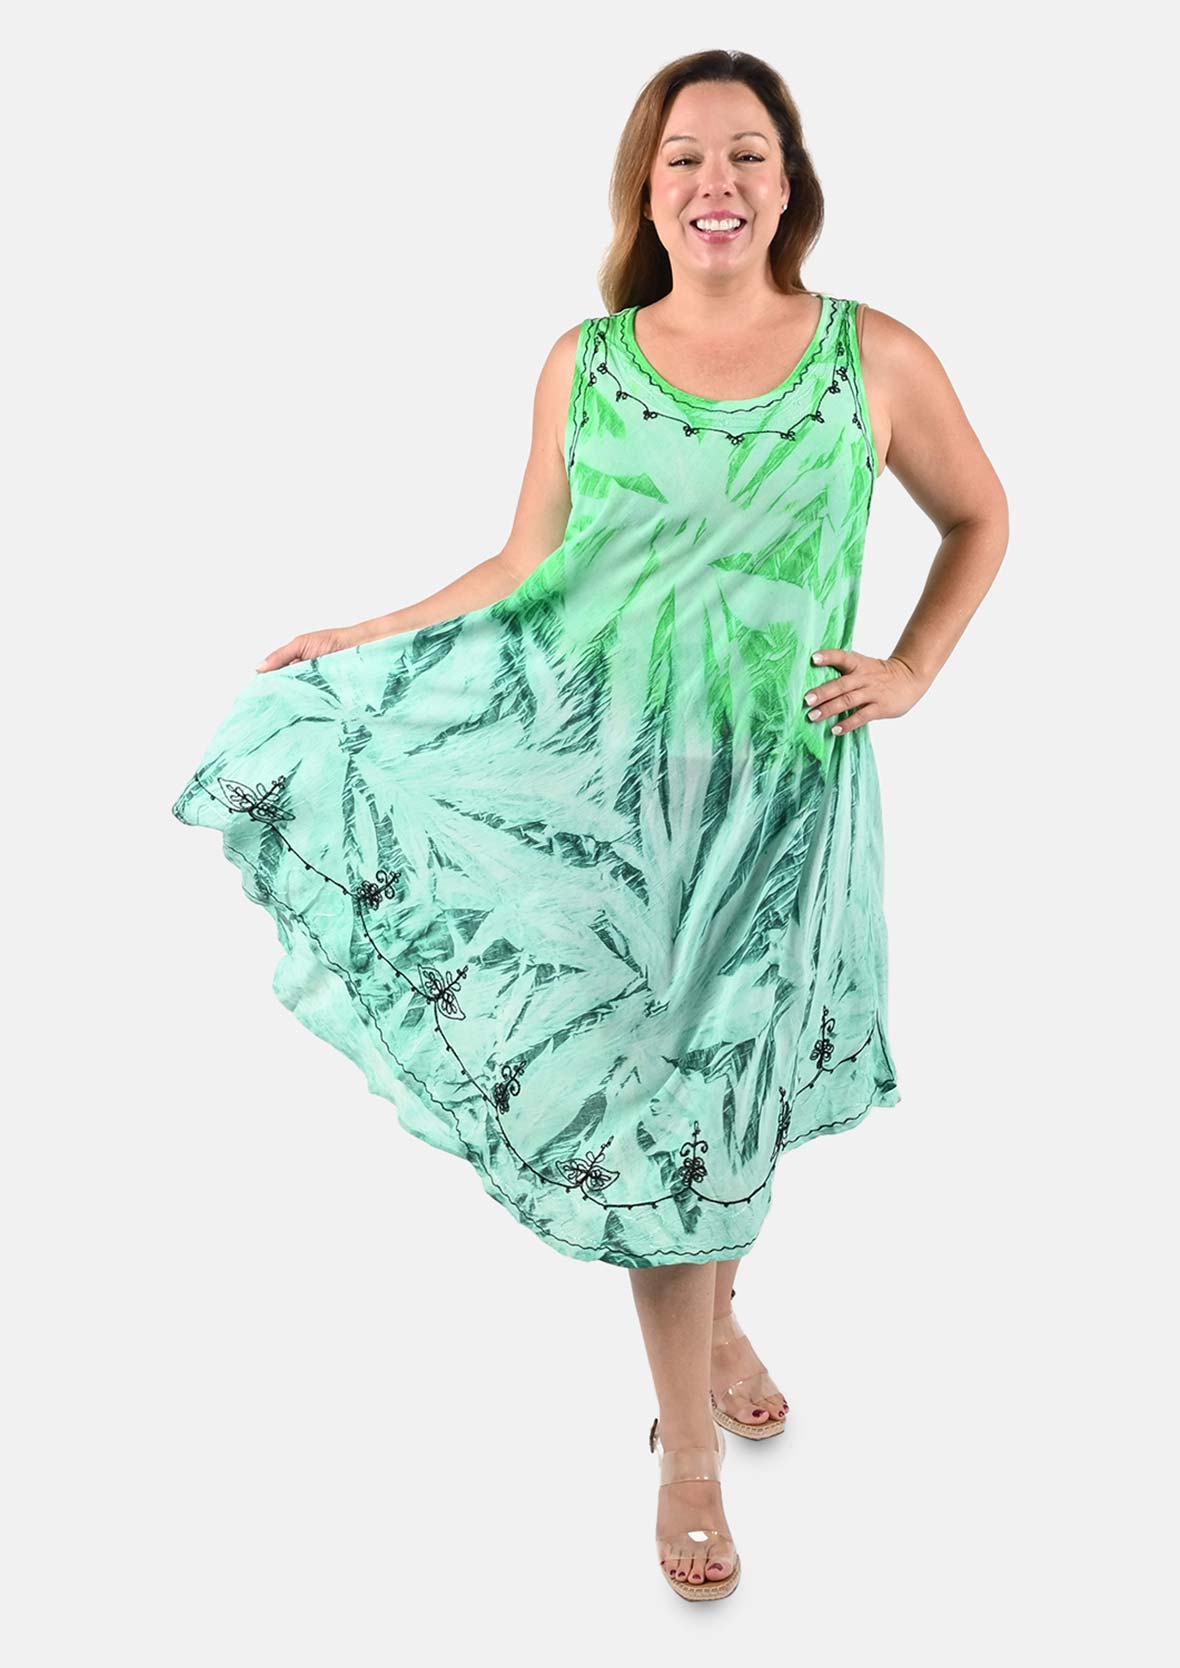 embroidered tie-dye turquoise umbrella dress #color_Turquoise Mint Green